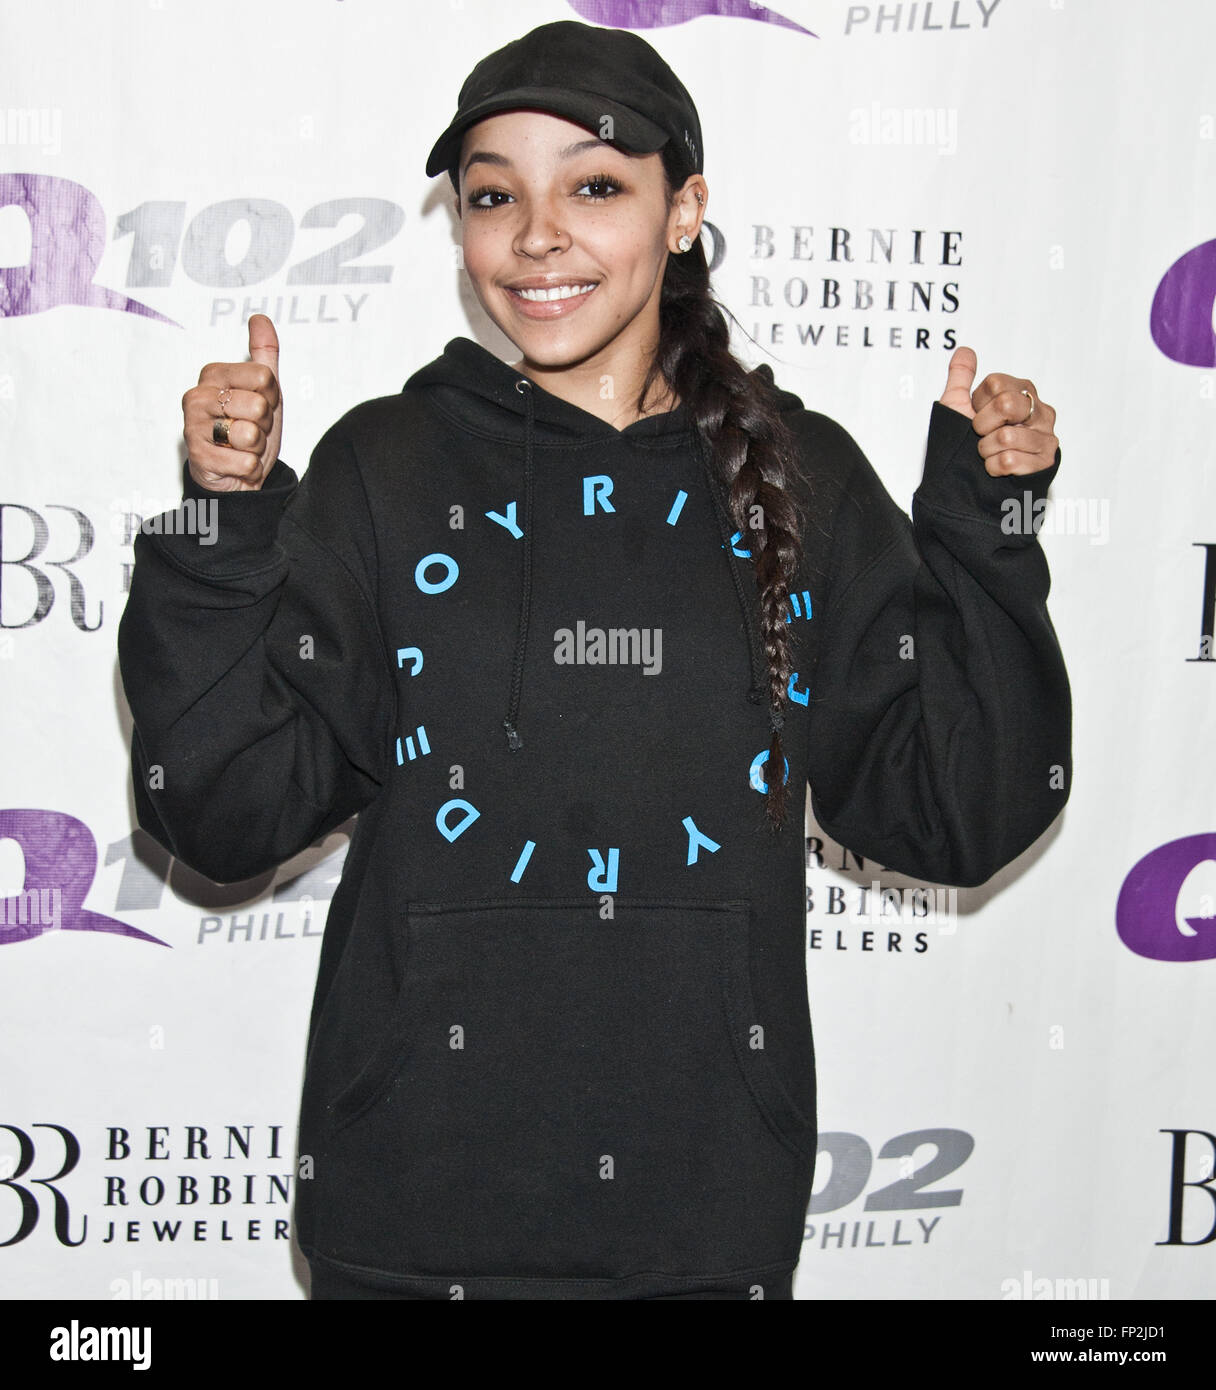 Bala Cynwyd, Pennsylvania, USA. 15 mars, 2016. American Singer-Songwriter Visites Tinashe Q102's Performance Theatre. Banque D'Images